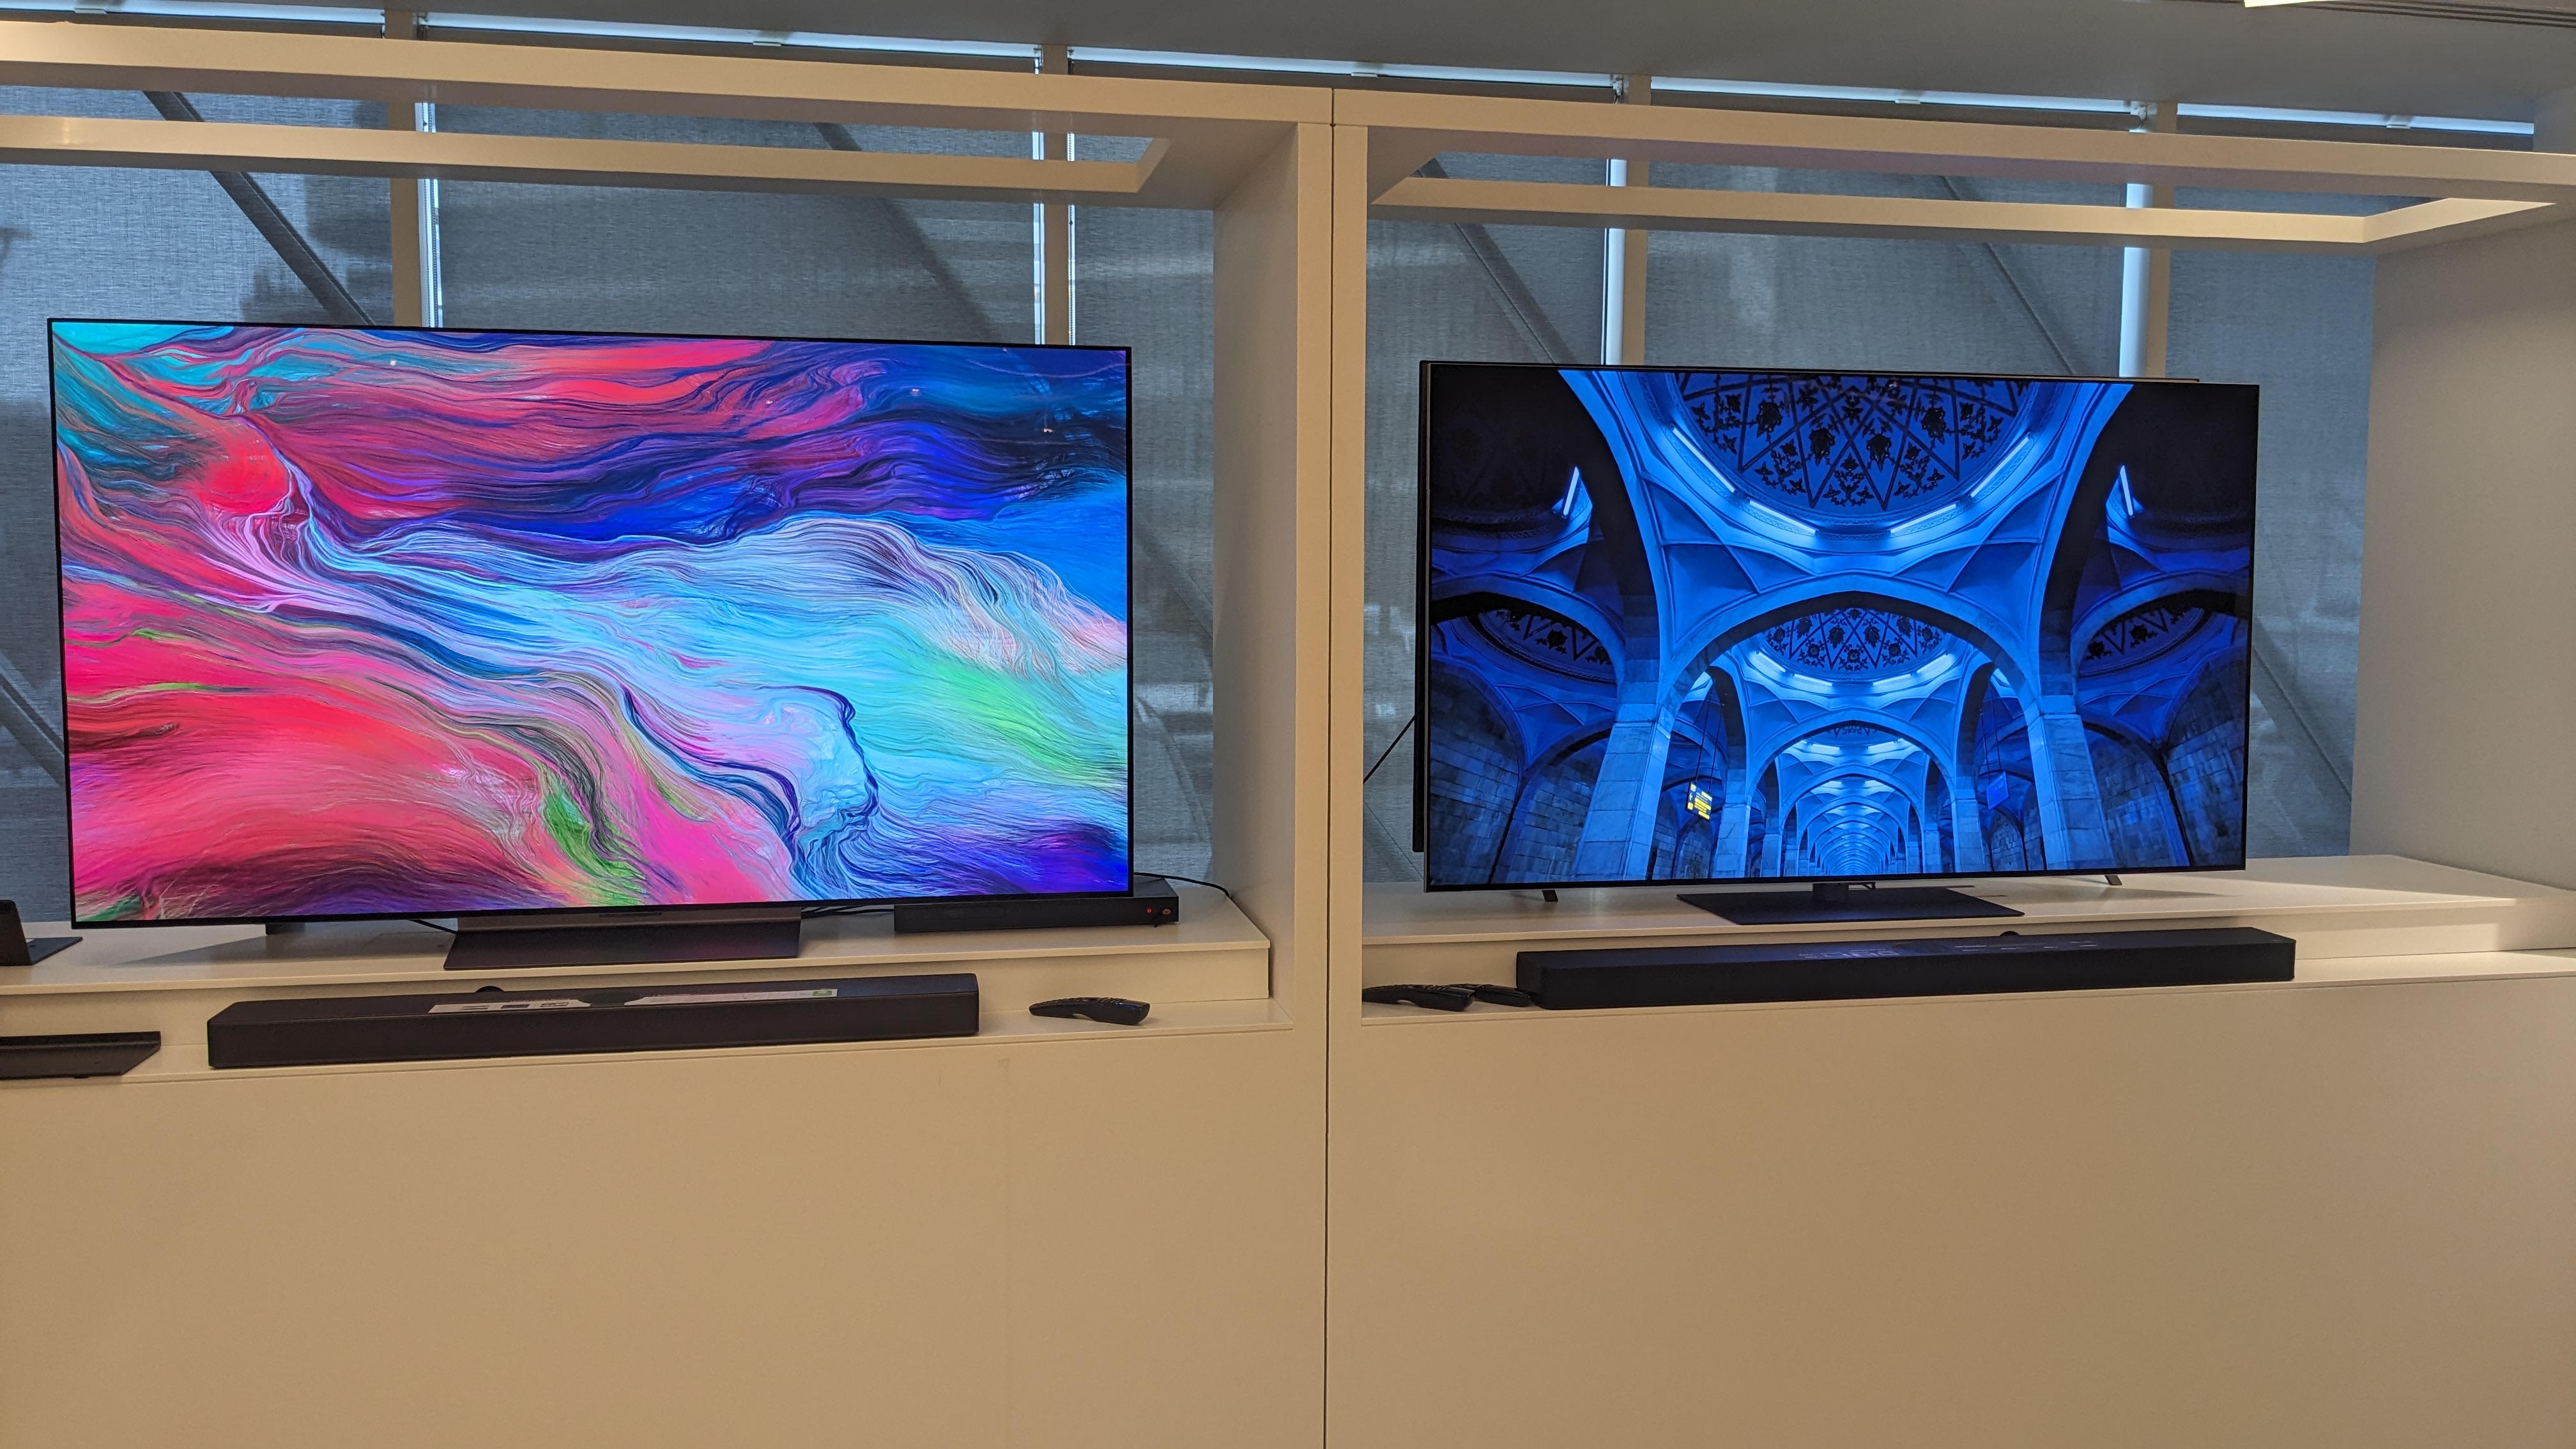 LG C4 and LG G4 OLED TV side by side